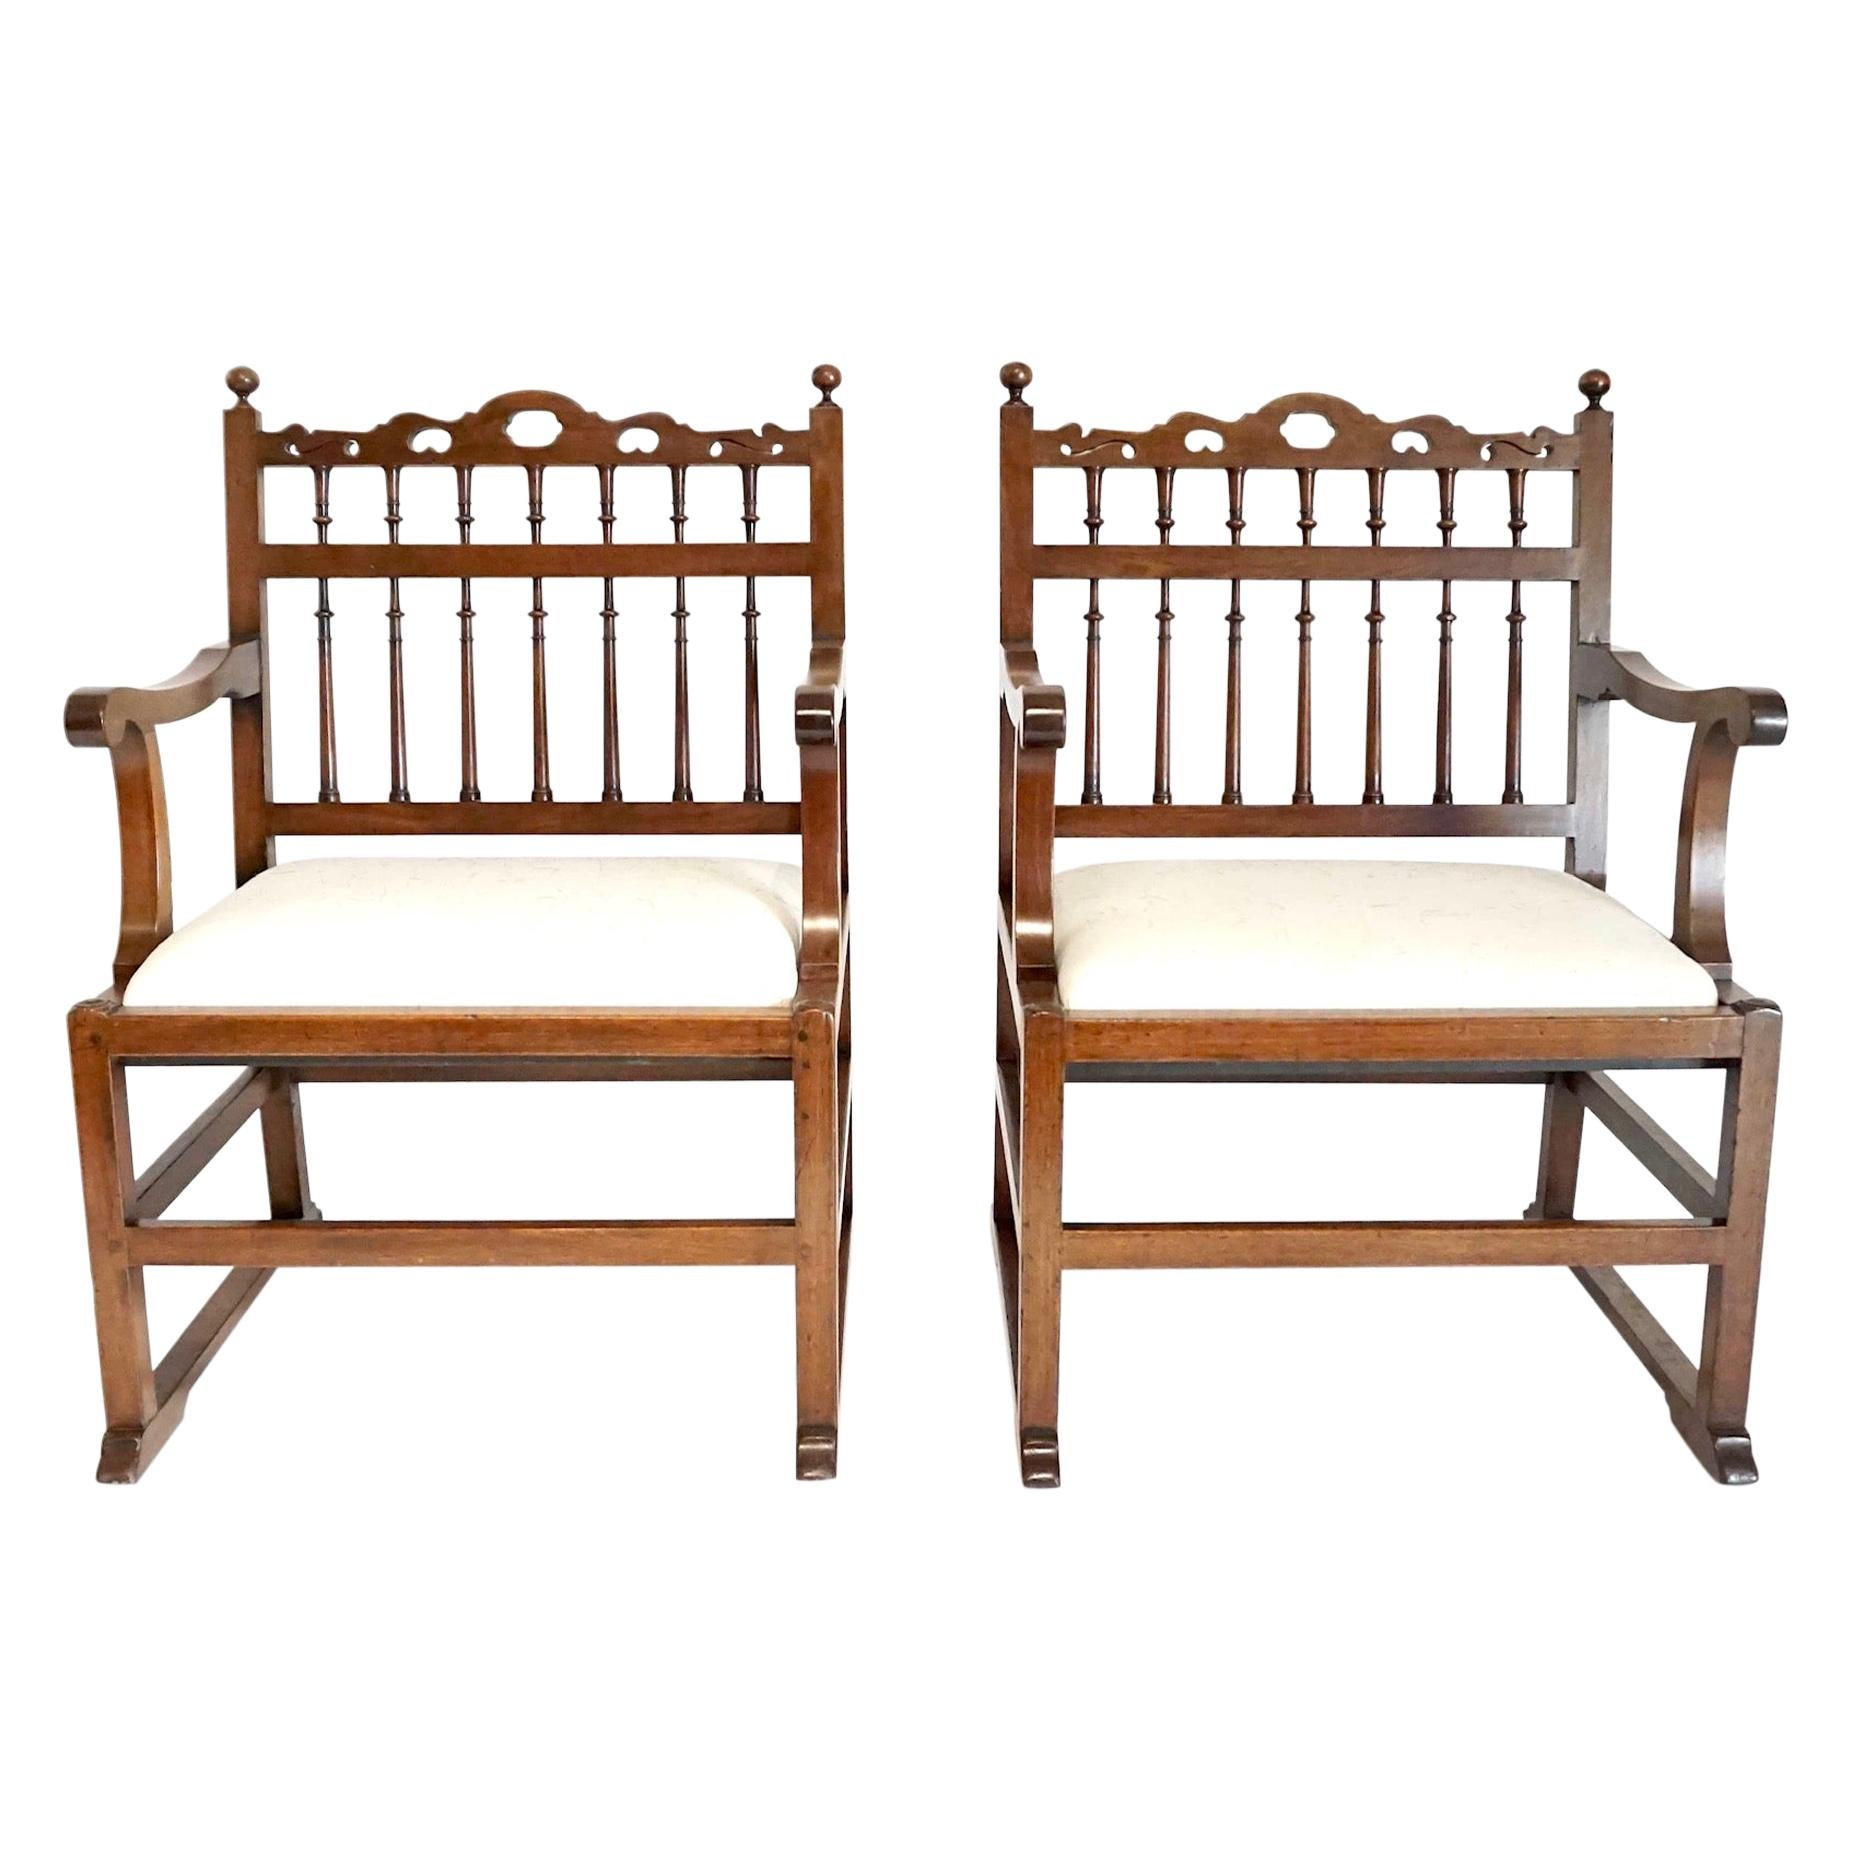 A Pair of Northern English Spindle-Back Arm Chairs, circa 1780 For Sale